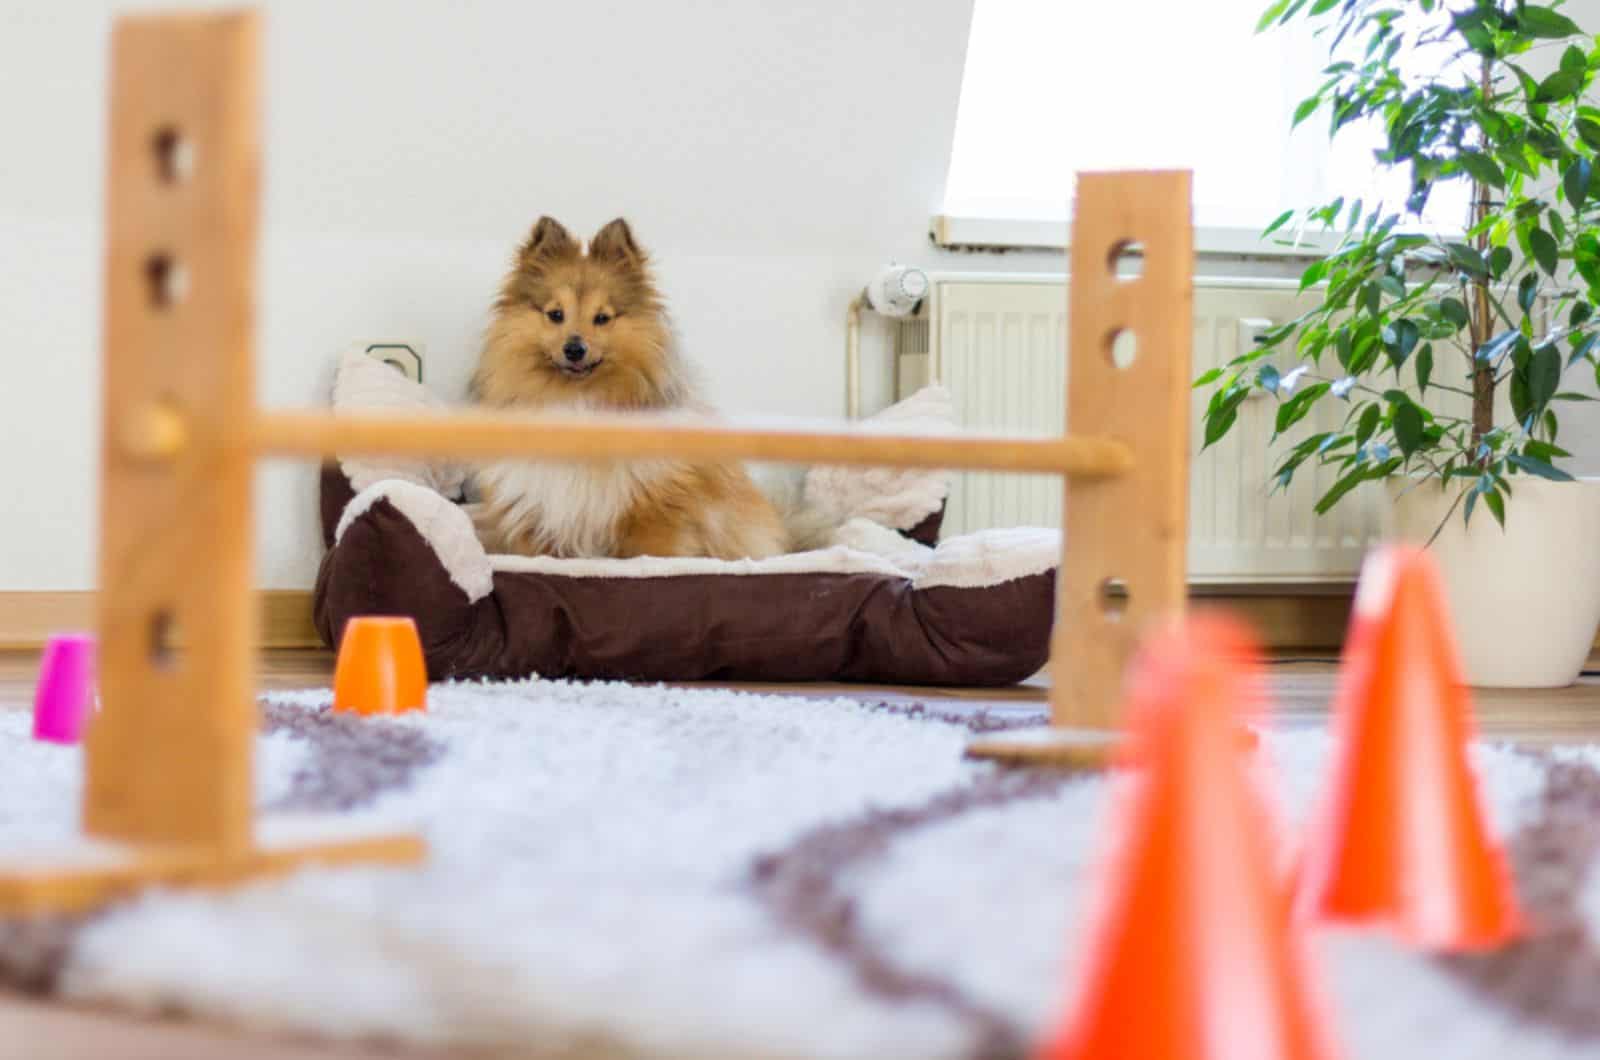 shetland sheepdog sits in front of a obstracle course at home